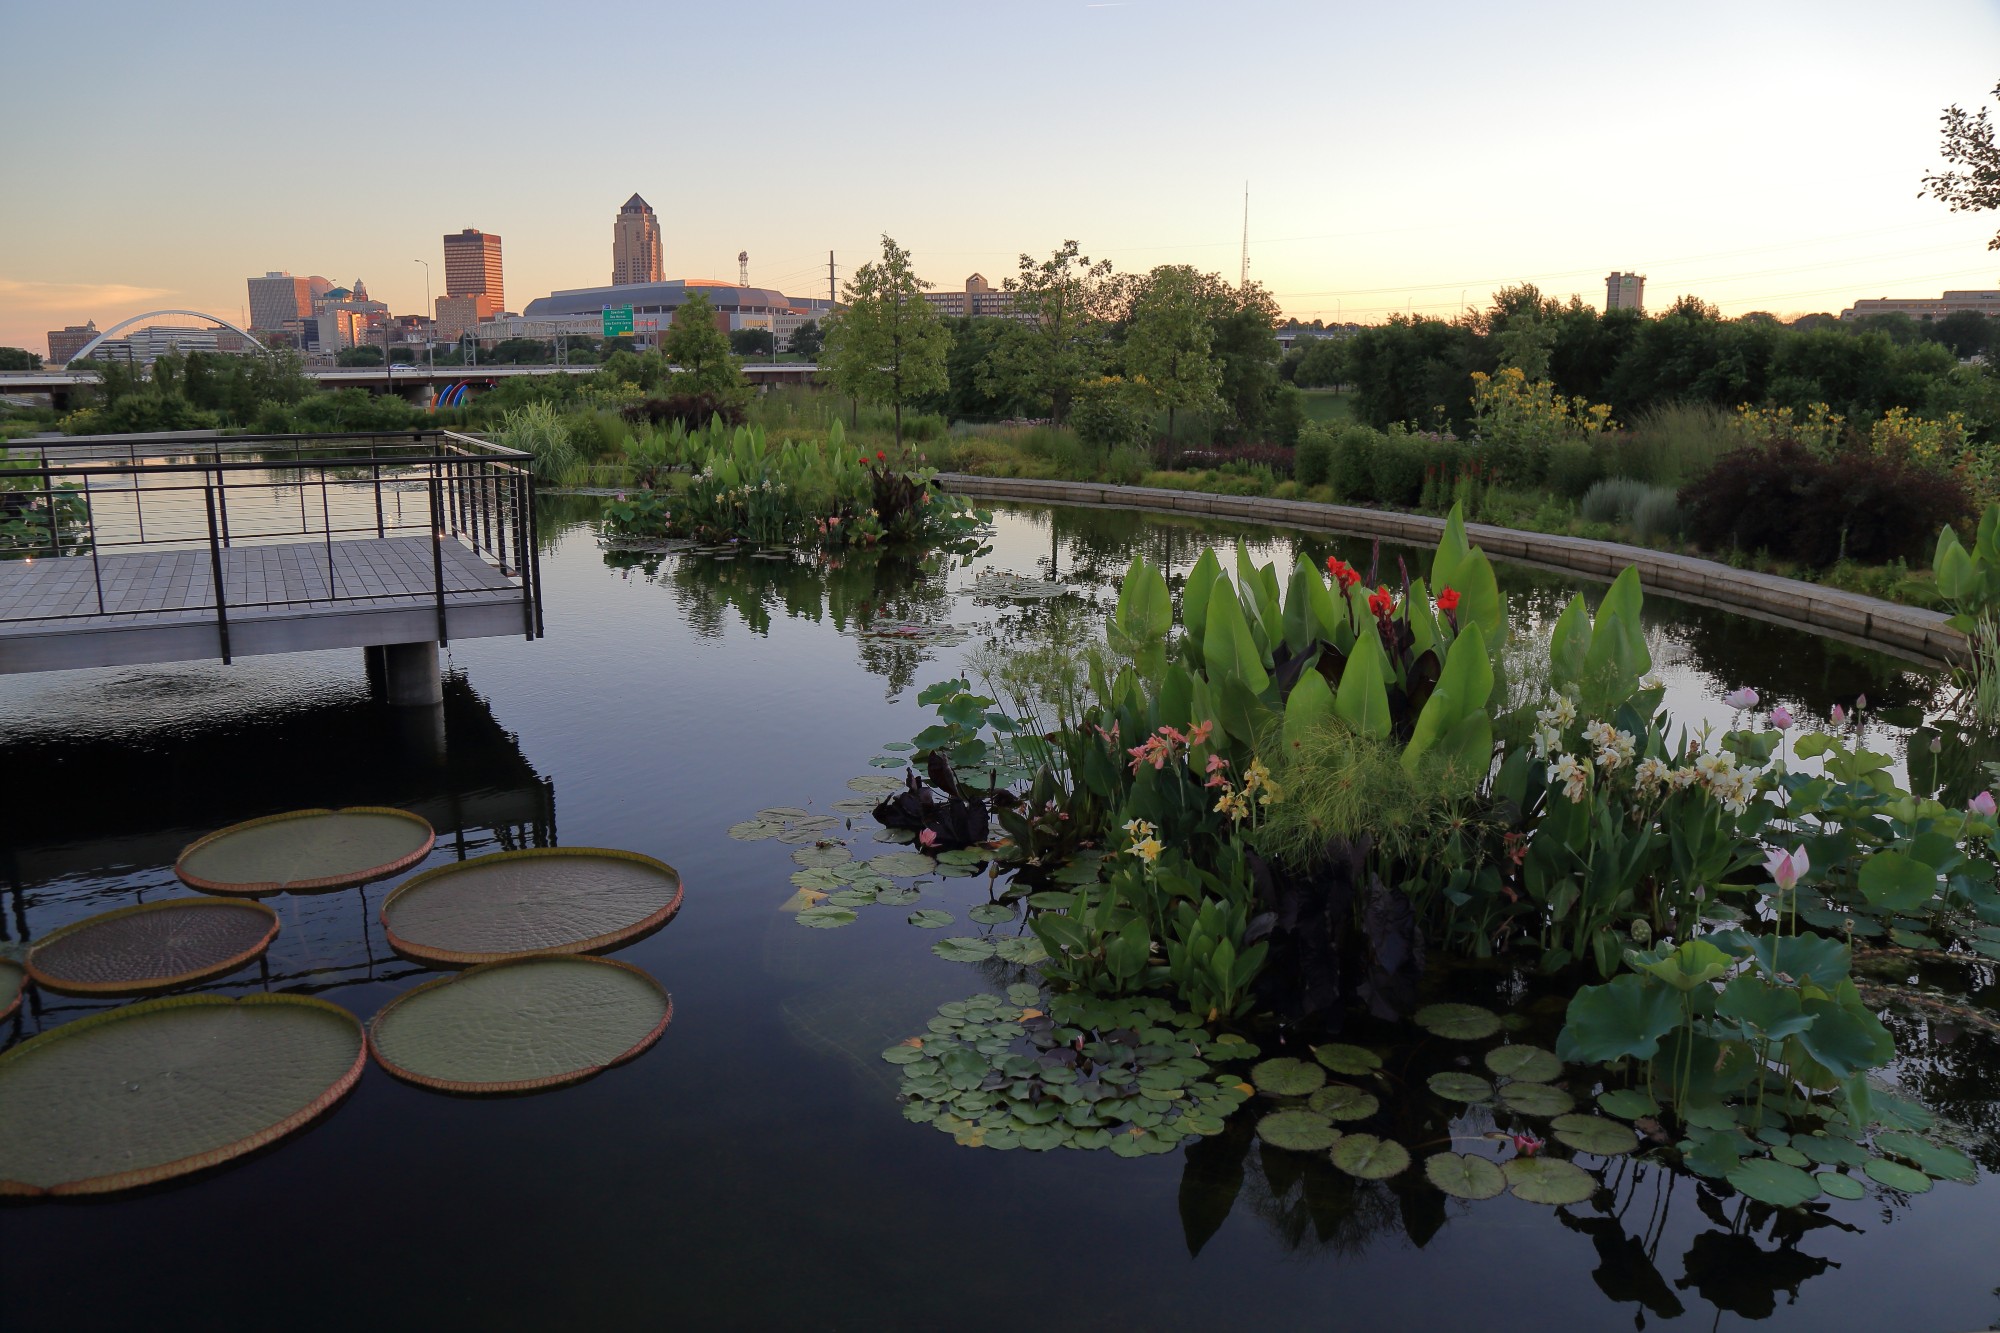 The water garden overlooking the Des Moines skyline on July 25. Photo by Kelly Norris.